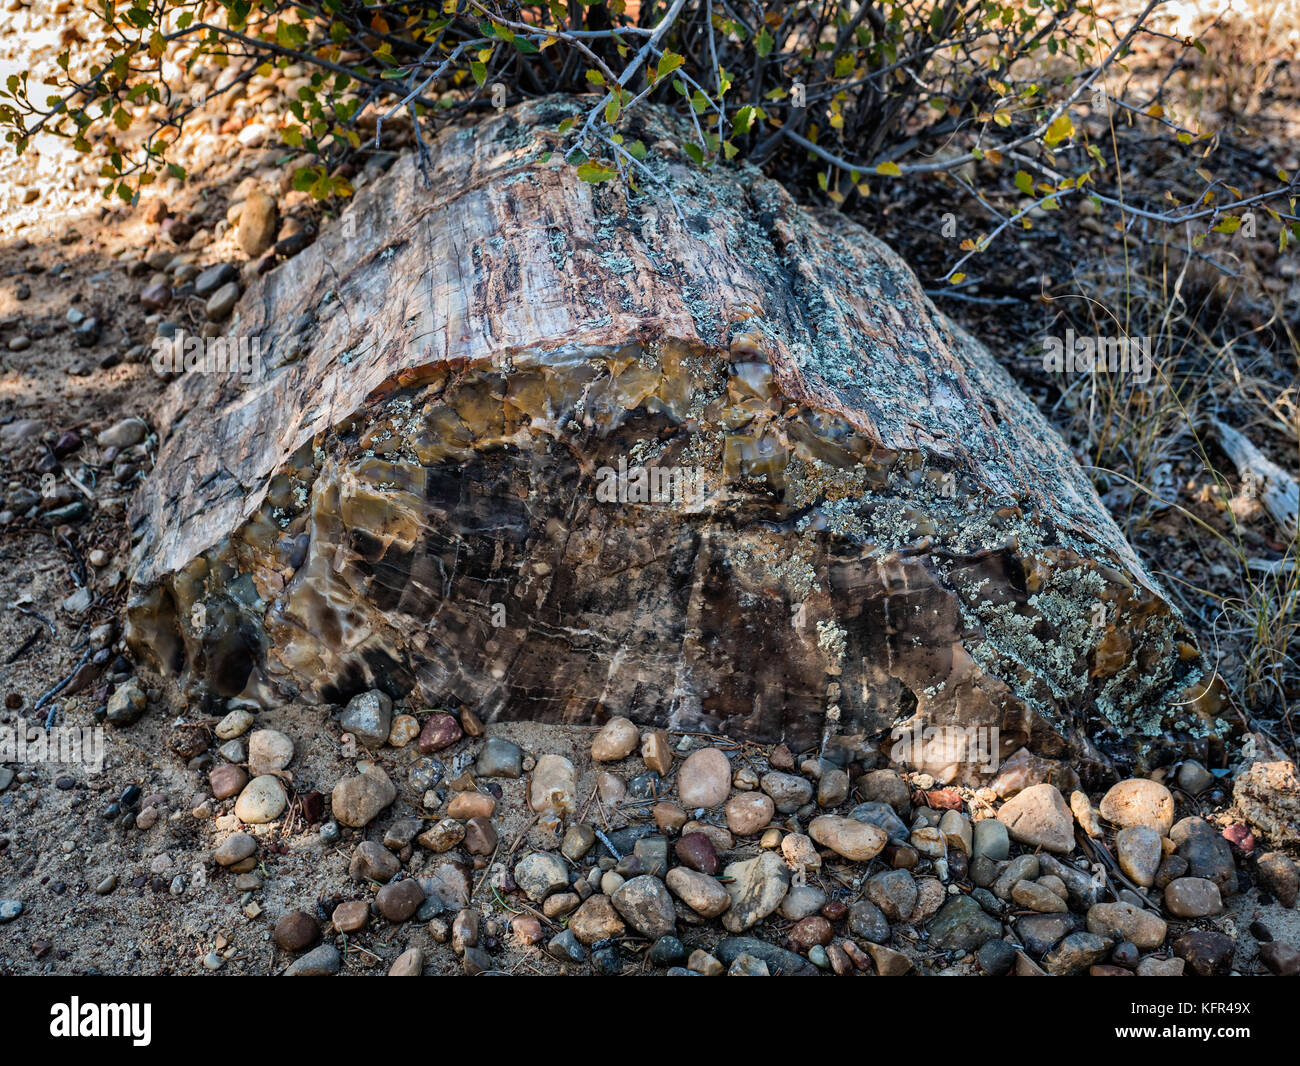 Versteinertes Holz in Escalante Petrified Forest State Park in Utah, USA Stockfoto